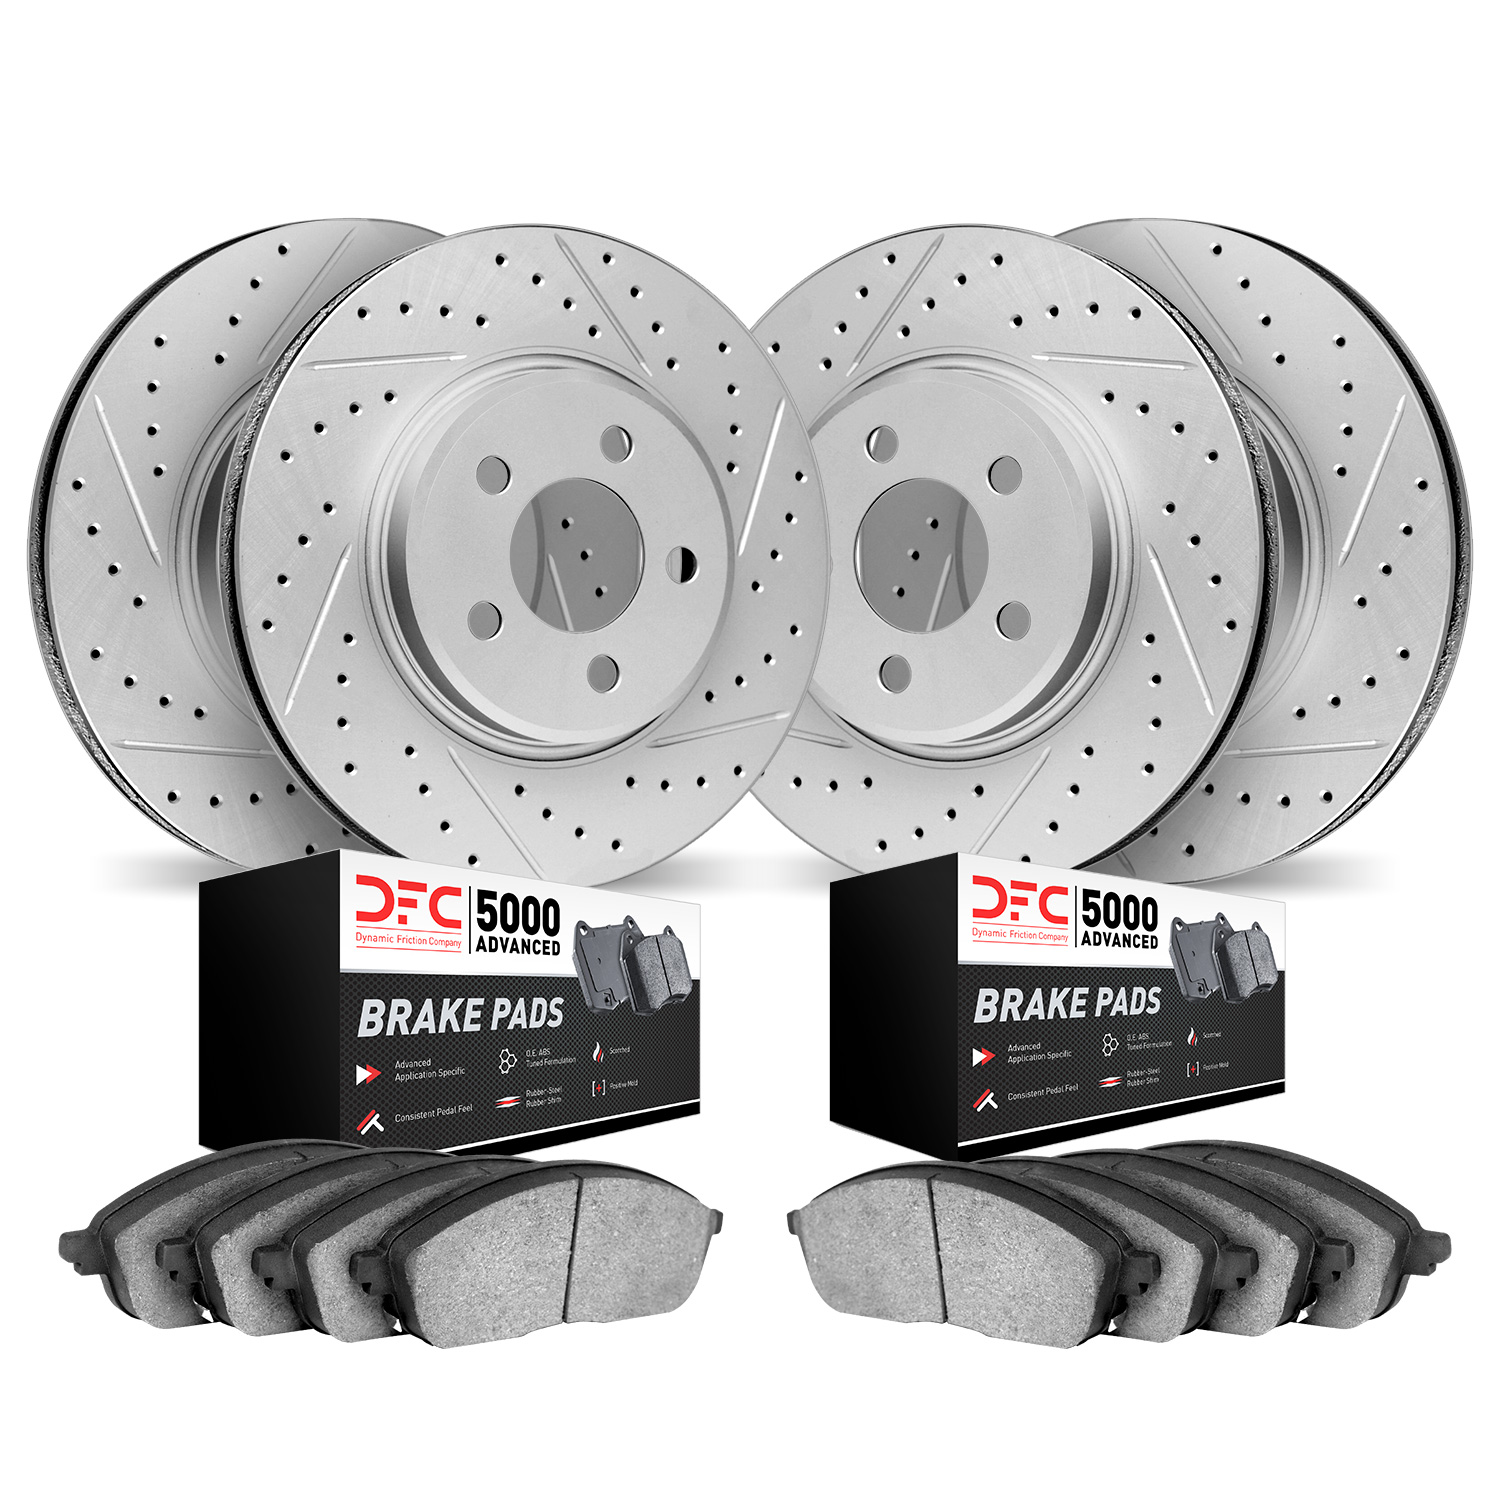 2504-40087 Geoperformance Drilled/Slotted Rotors w/5000 Advanced Brake Pads Kit, 2002-2006 Multiple Makes/Models, Position: Fron